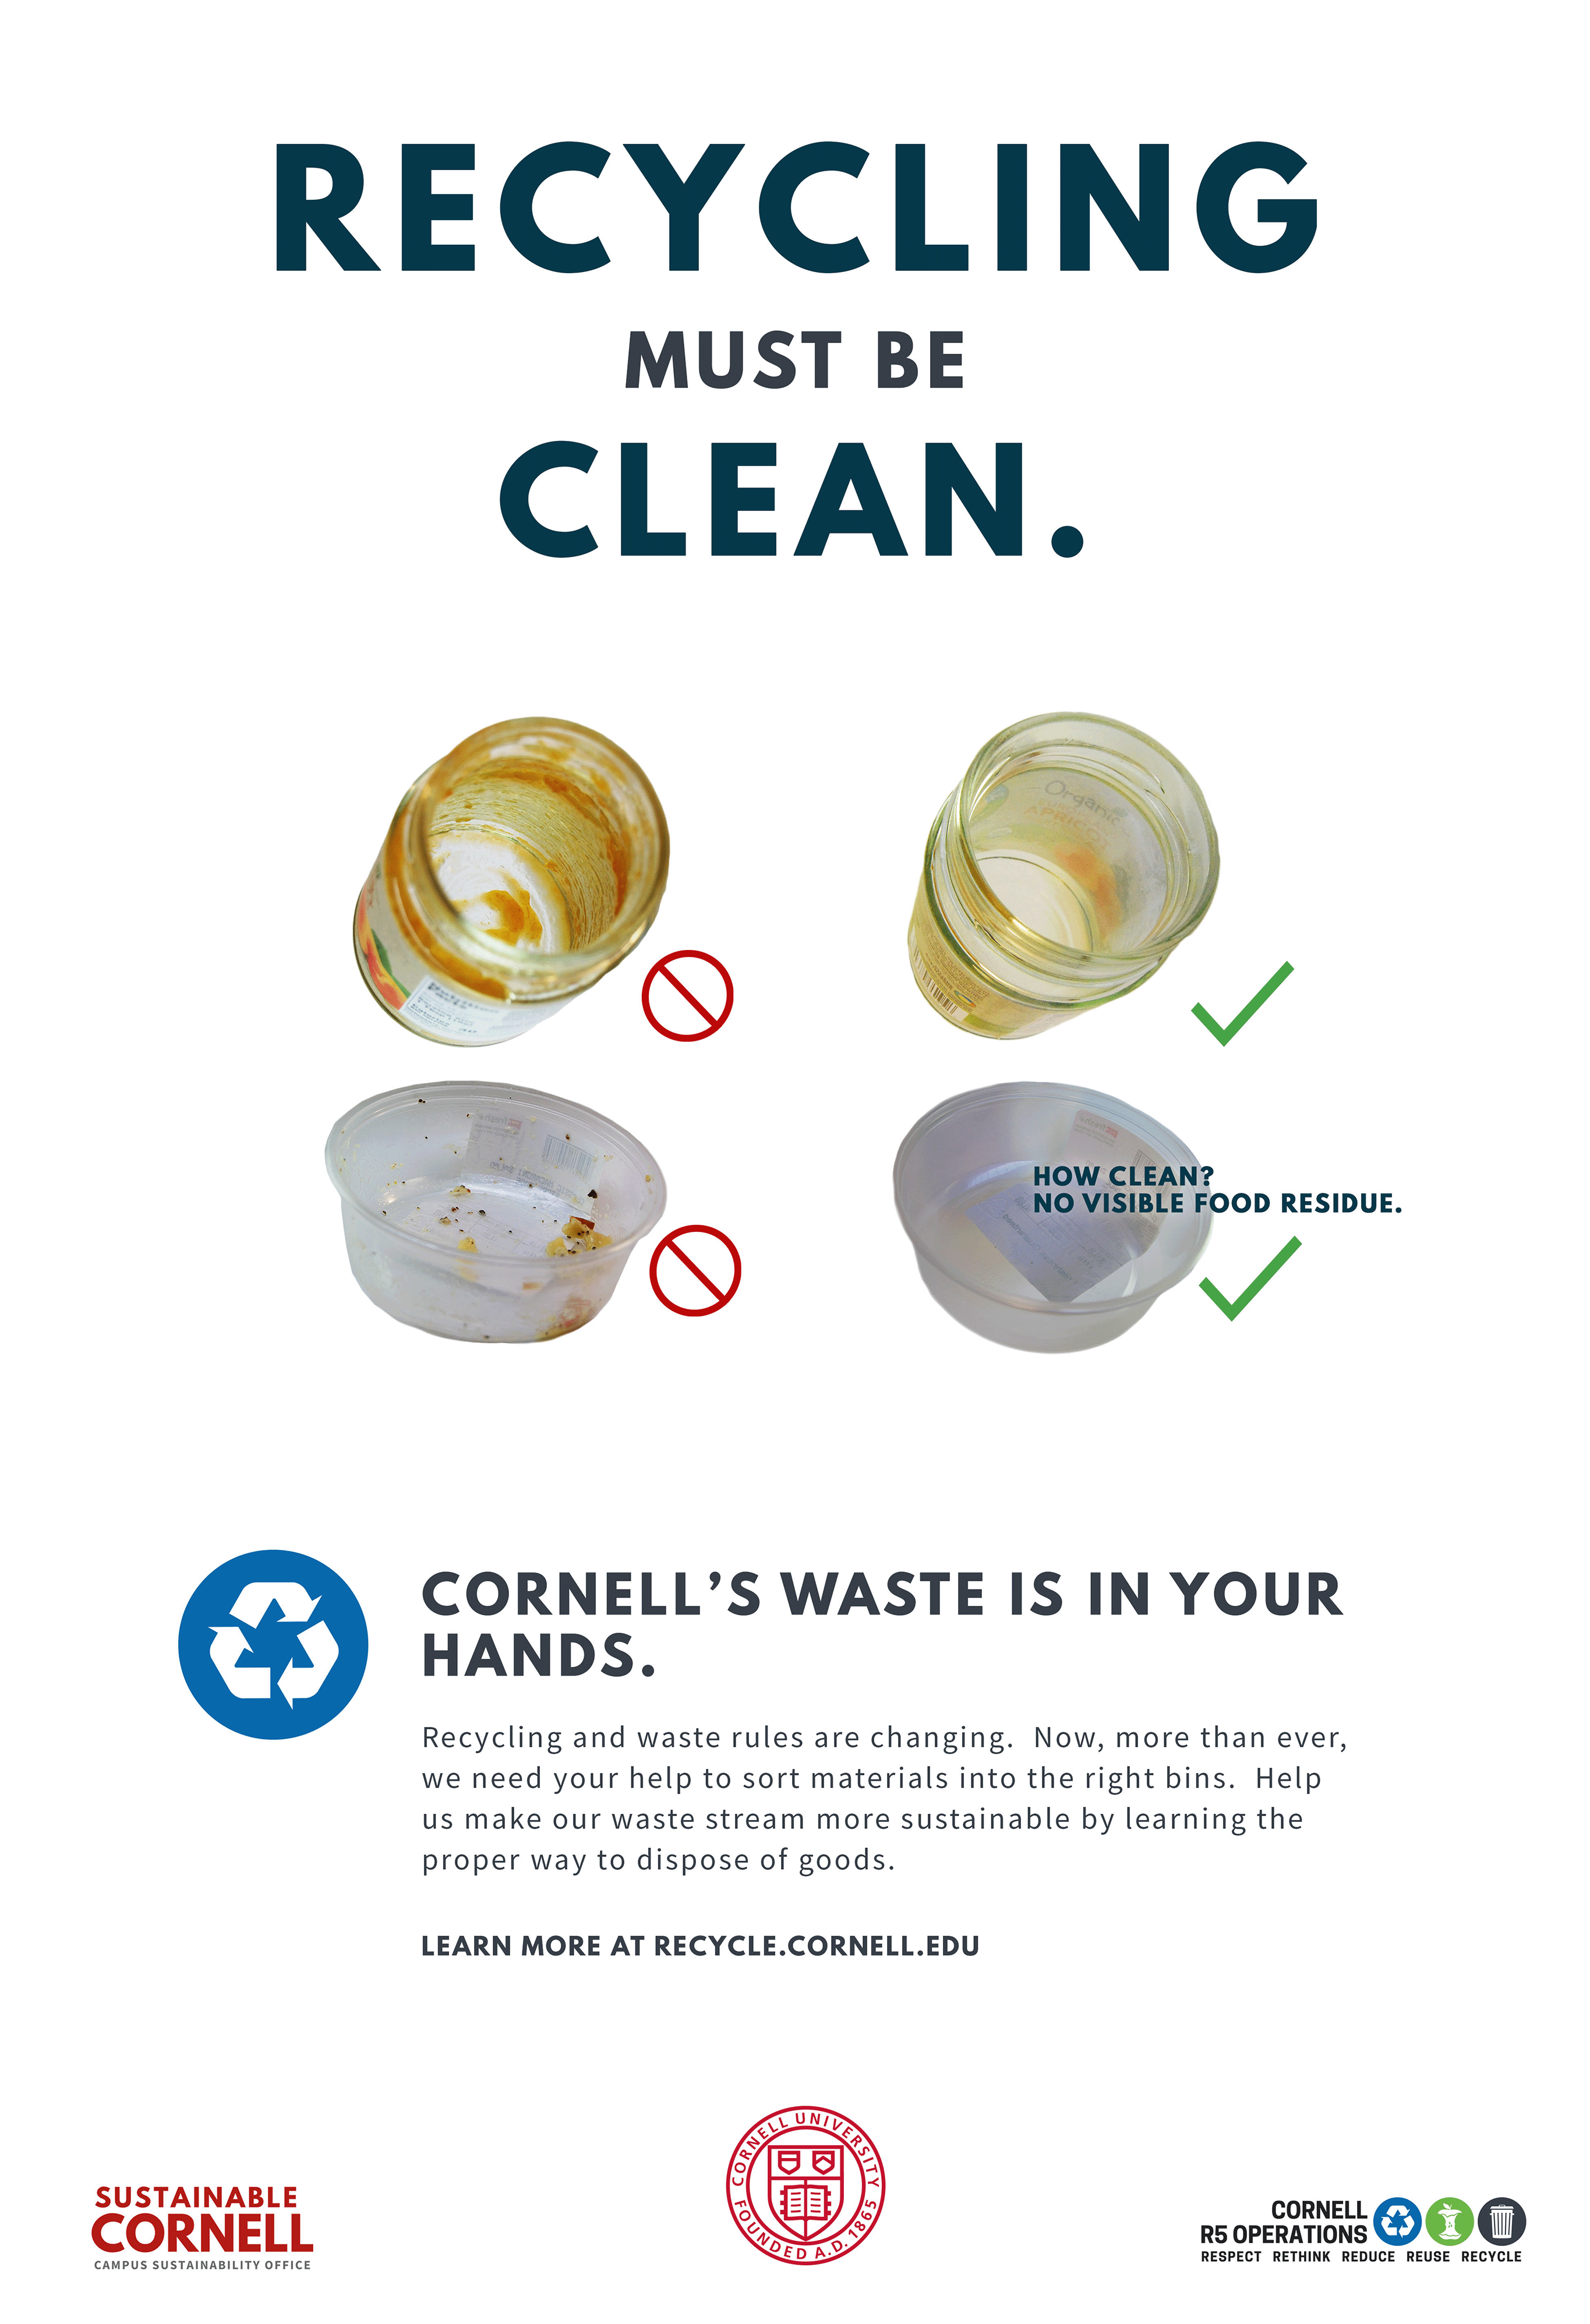 Poster image of dirty jars "bad" and completely clean jars "good" with text "Keep it Clean." Text below reads Cornell's waste is in your hands.